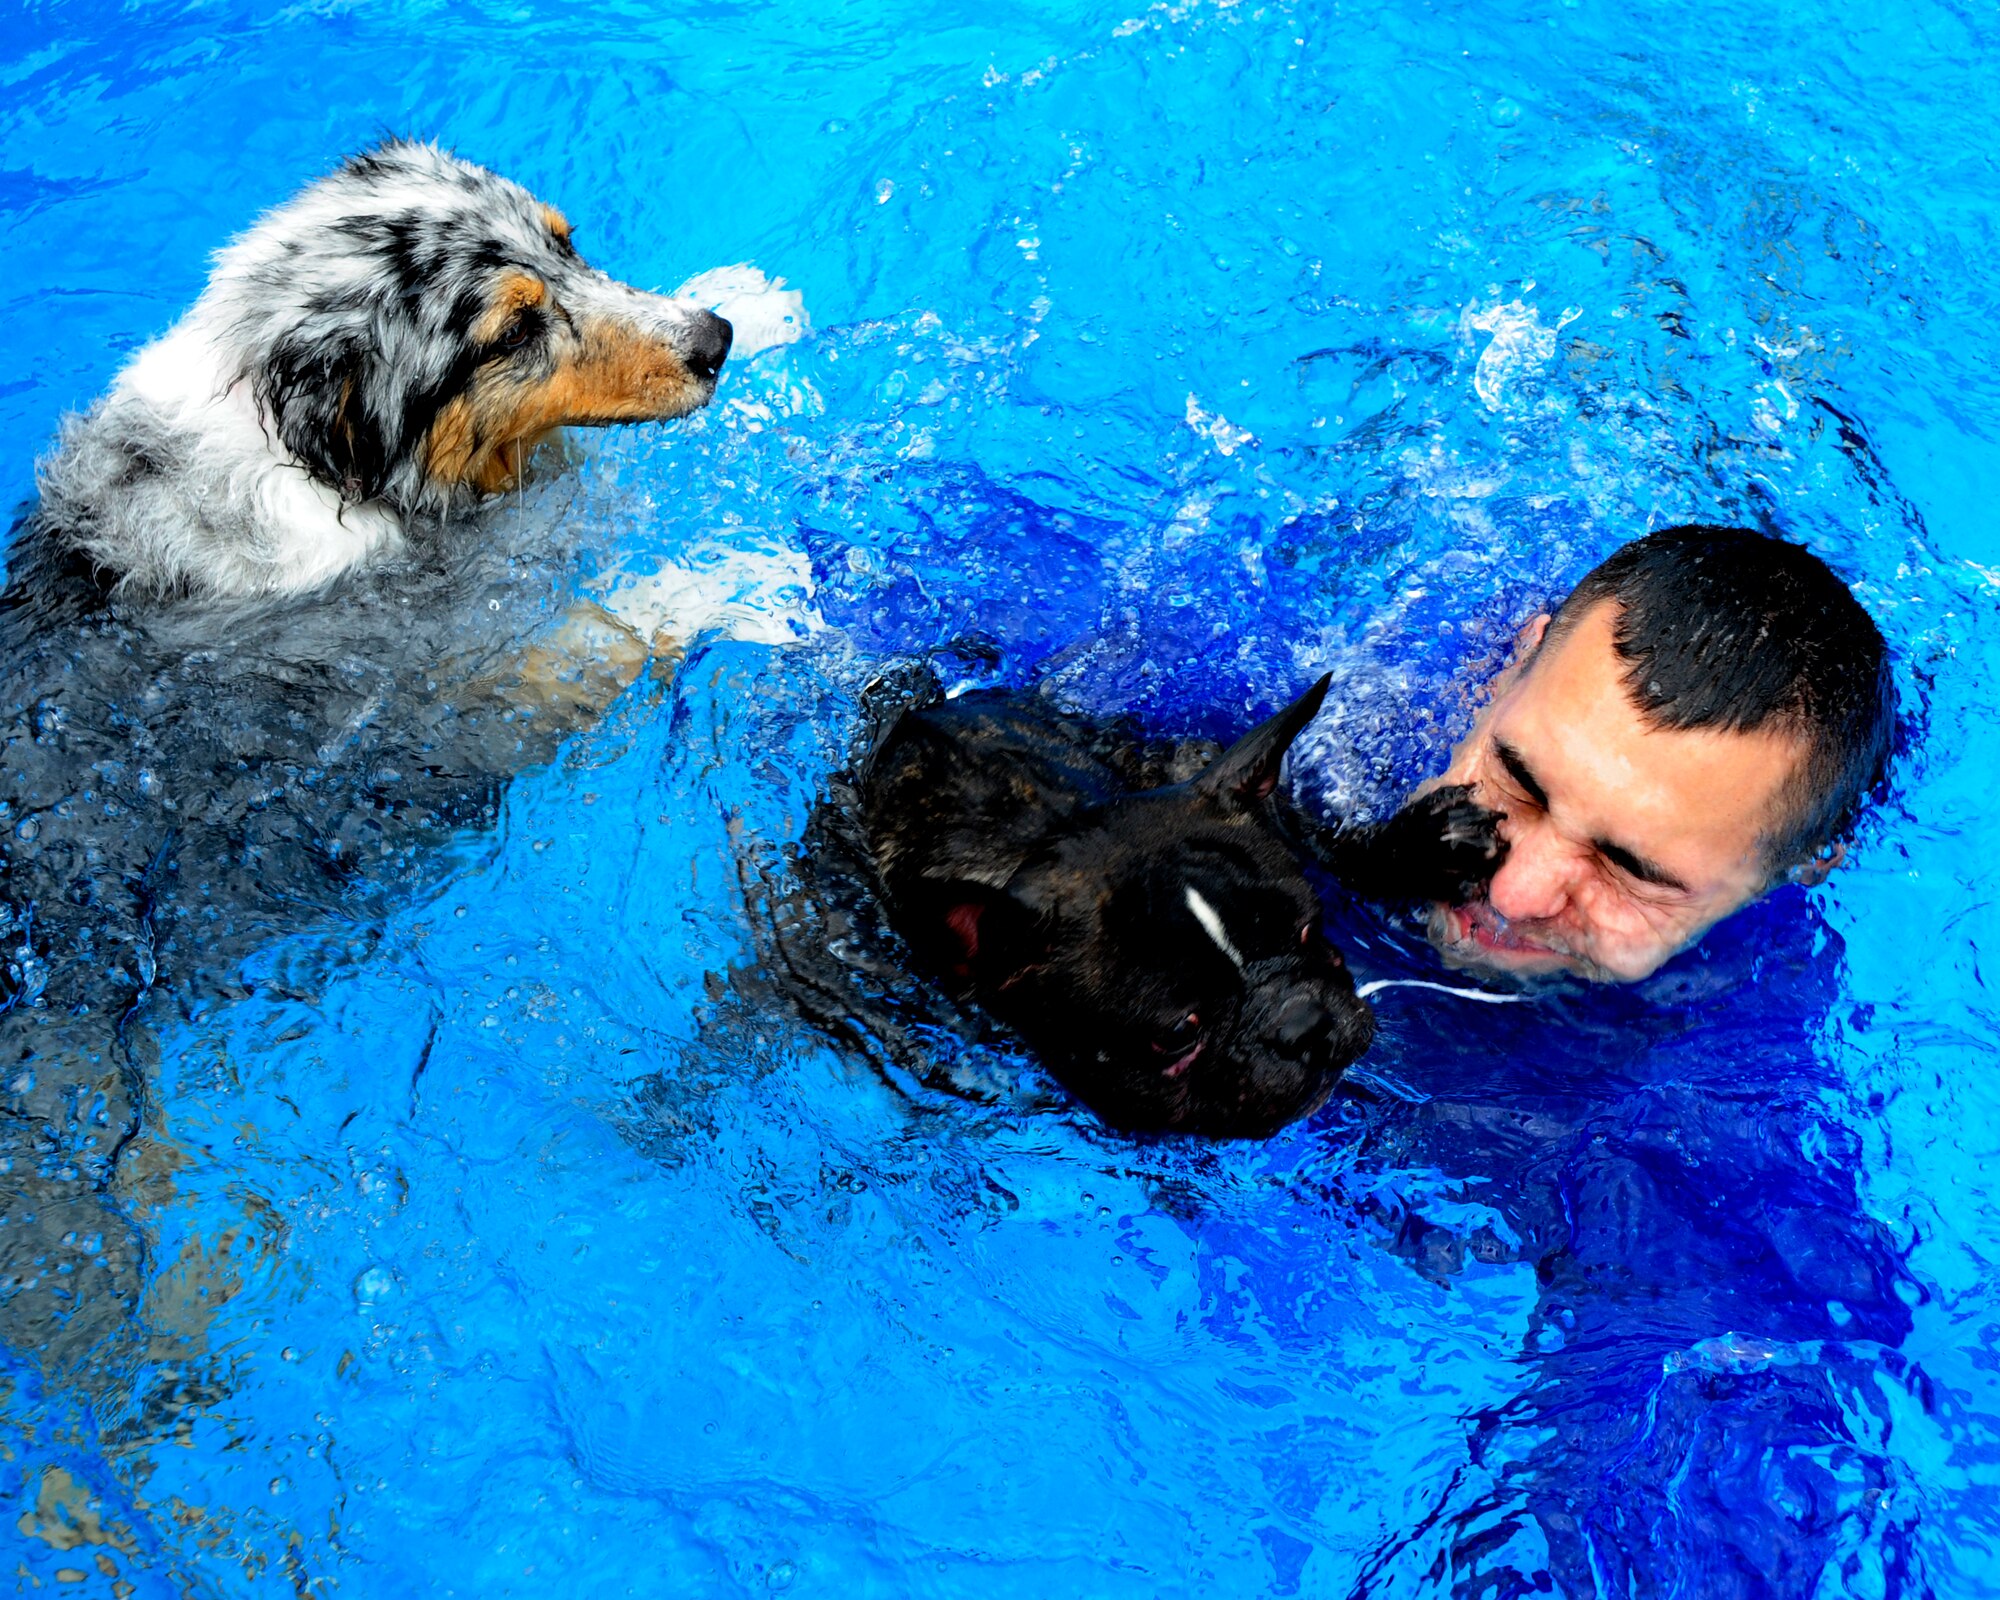 U.S. Air Force Capt. Dayne Foote, 39th Security Forces Squadron Intel and Investigations officer in charge, swims with his dog Olaf, during the 2016 Dog Daze Feb. 27, 2016, at Incirlik Air Base, Turkey. Titans were able to bring their canine pals to the pool to enjoy the cool water and relax in the sun. (U.S. Air Force photo by Airman Daniel Lile/Released)